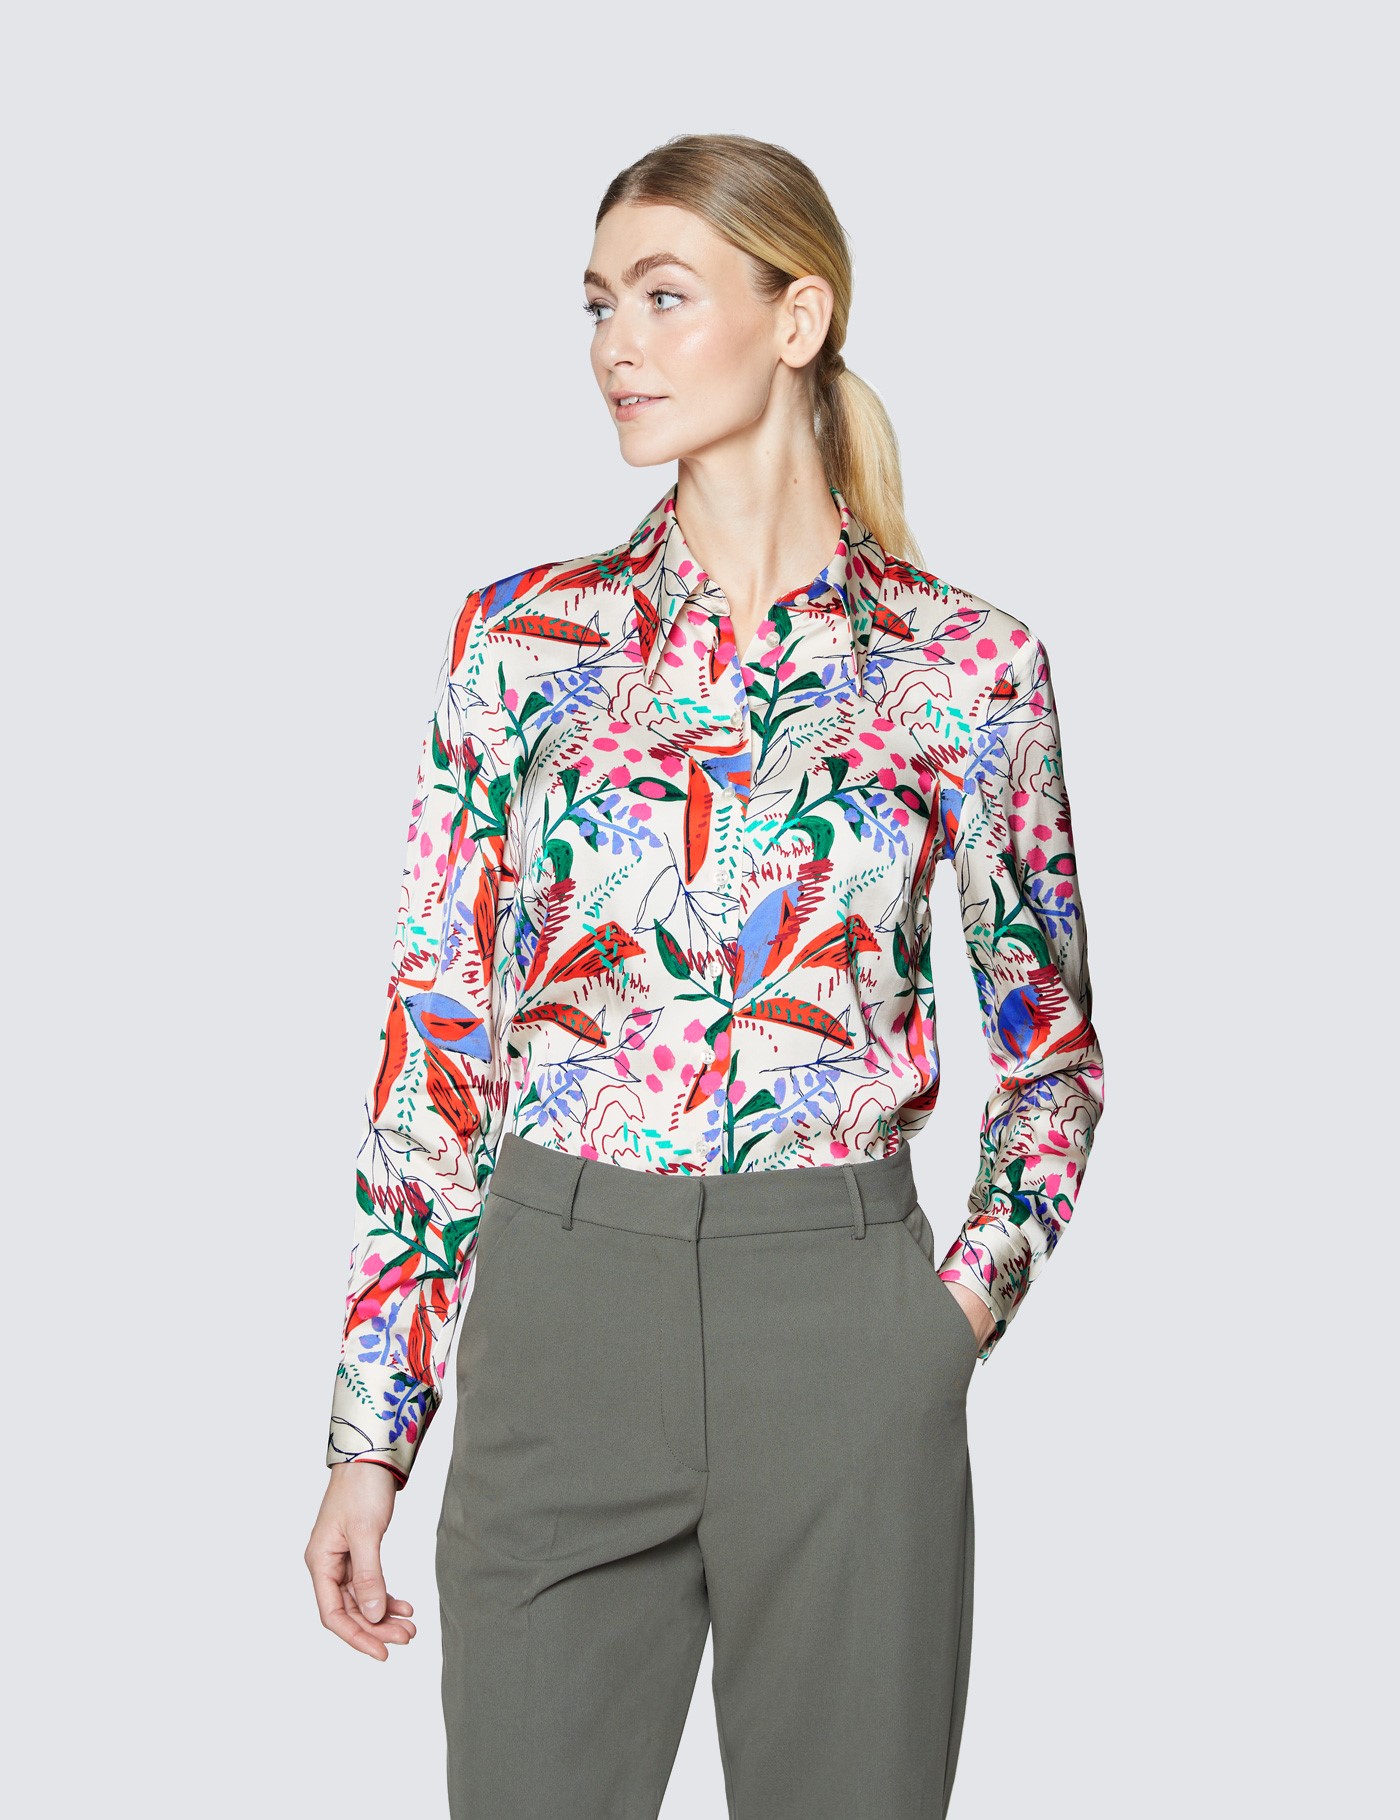 Satin Women's Semi Fitted Boutique Shirt with Floral Print in Cream ...